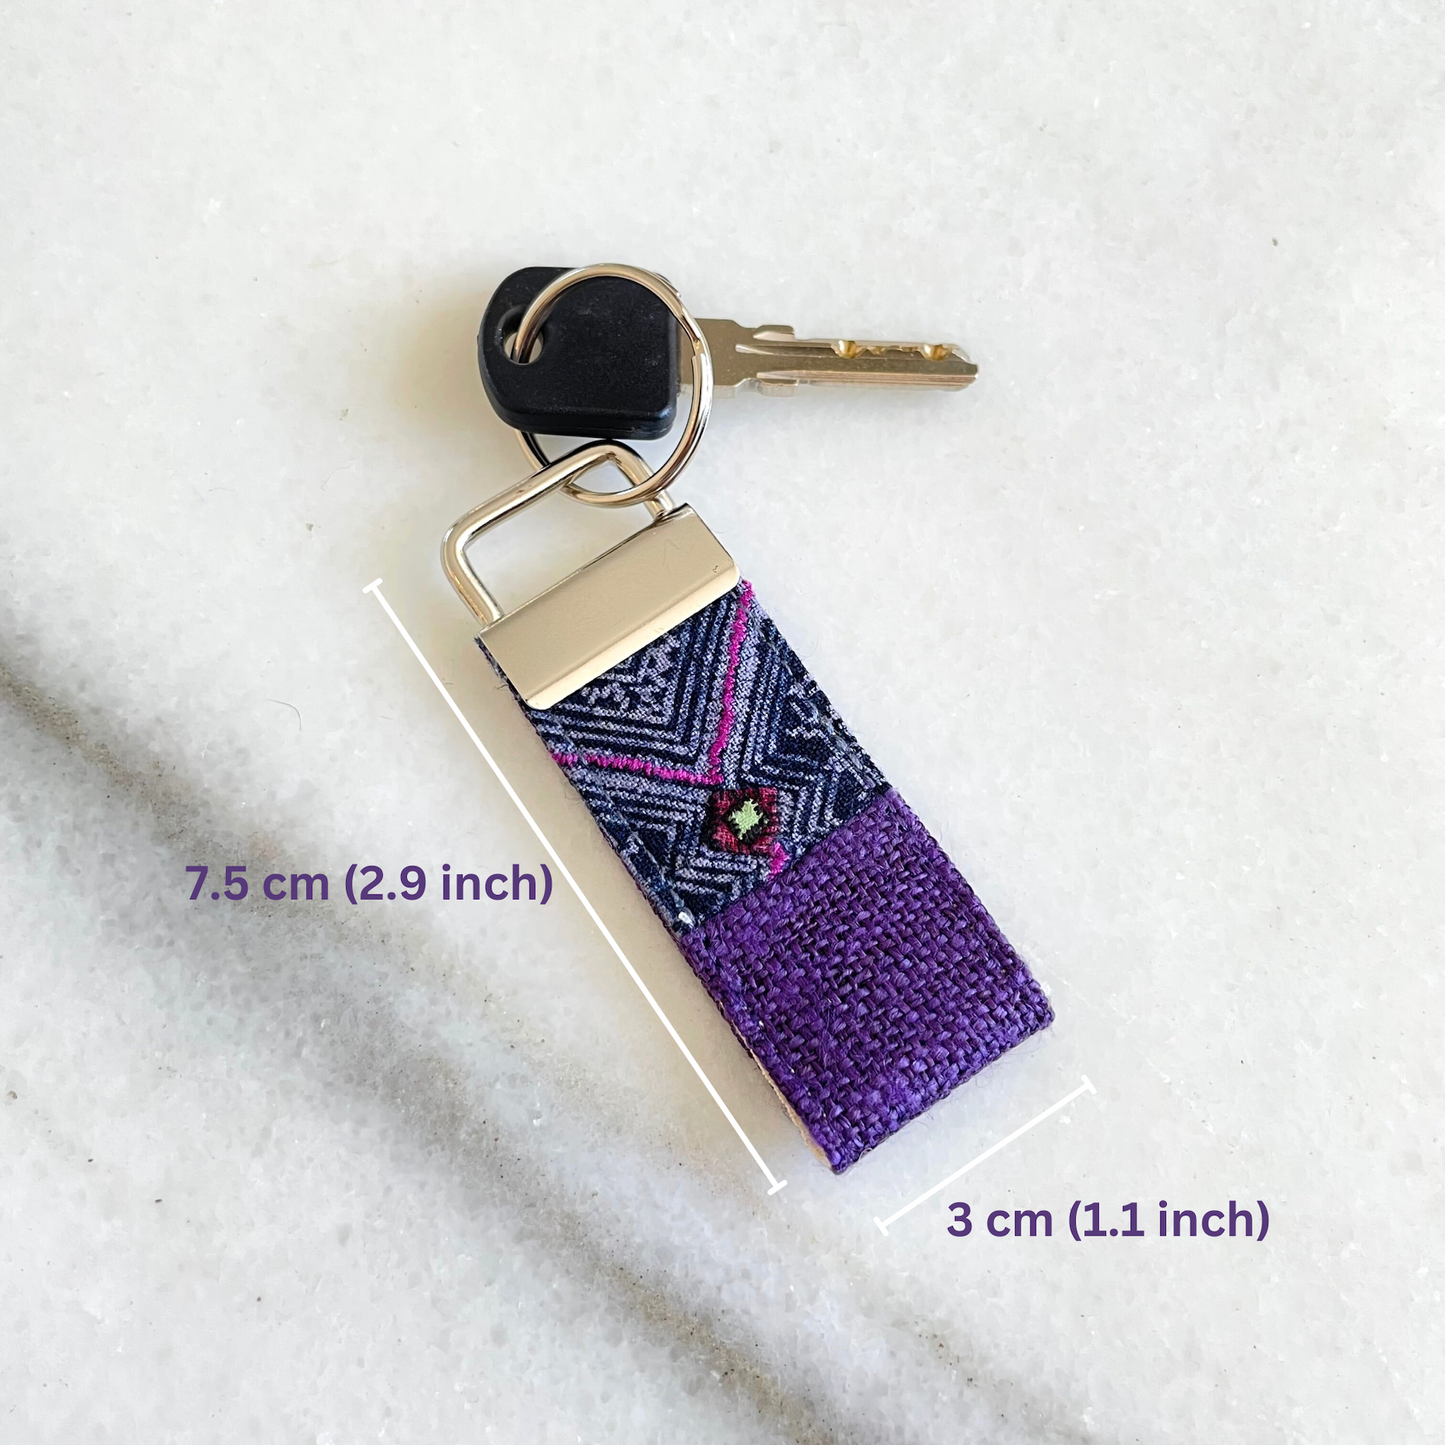 Turquoise blue hemp fabric keychain with vintage batik patch, stainless metal key fob